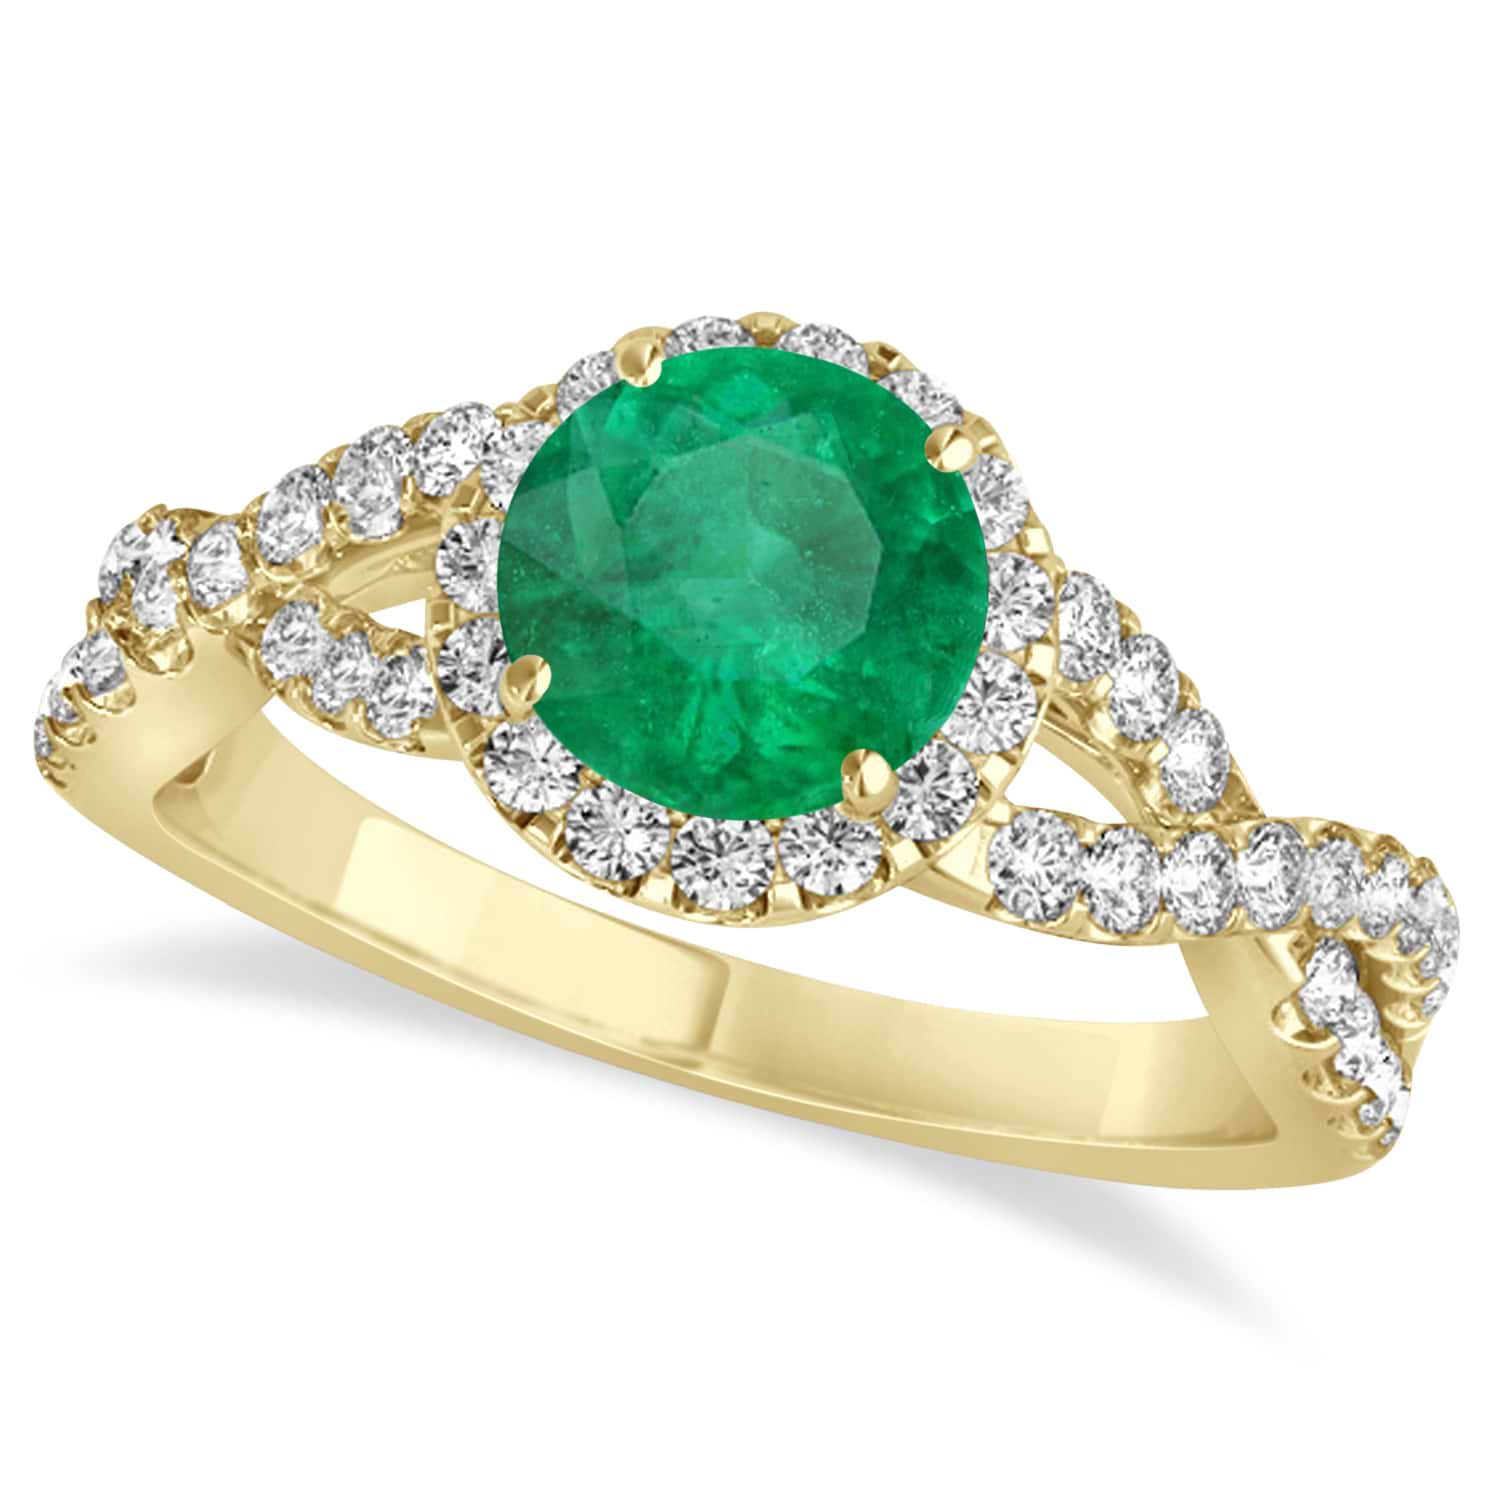 Emerald & Diamond Twisted Engagement Ring 14k Yellow Gold 1.30ct